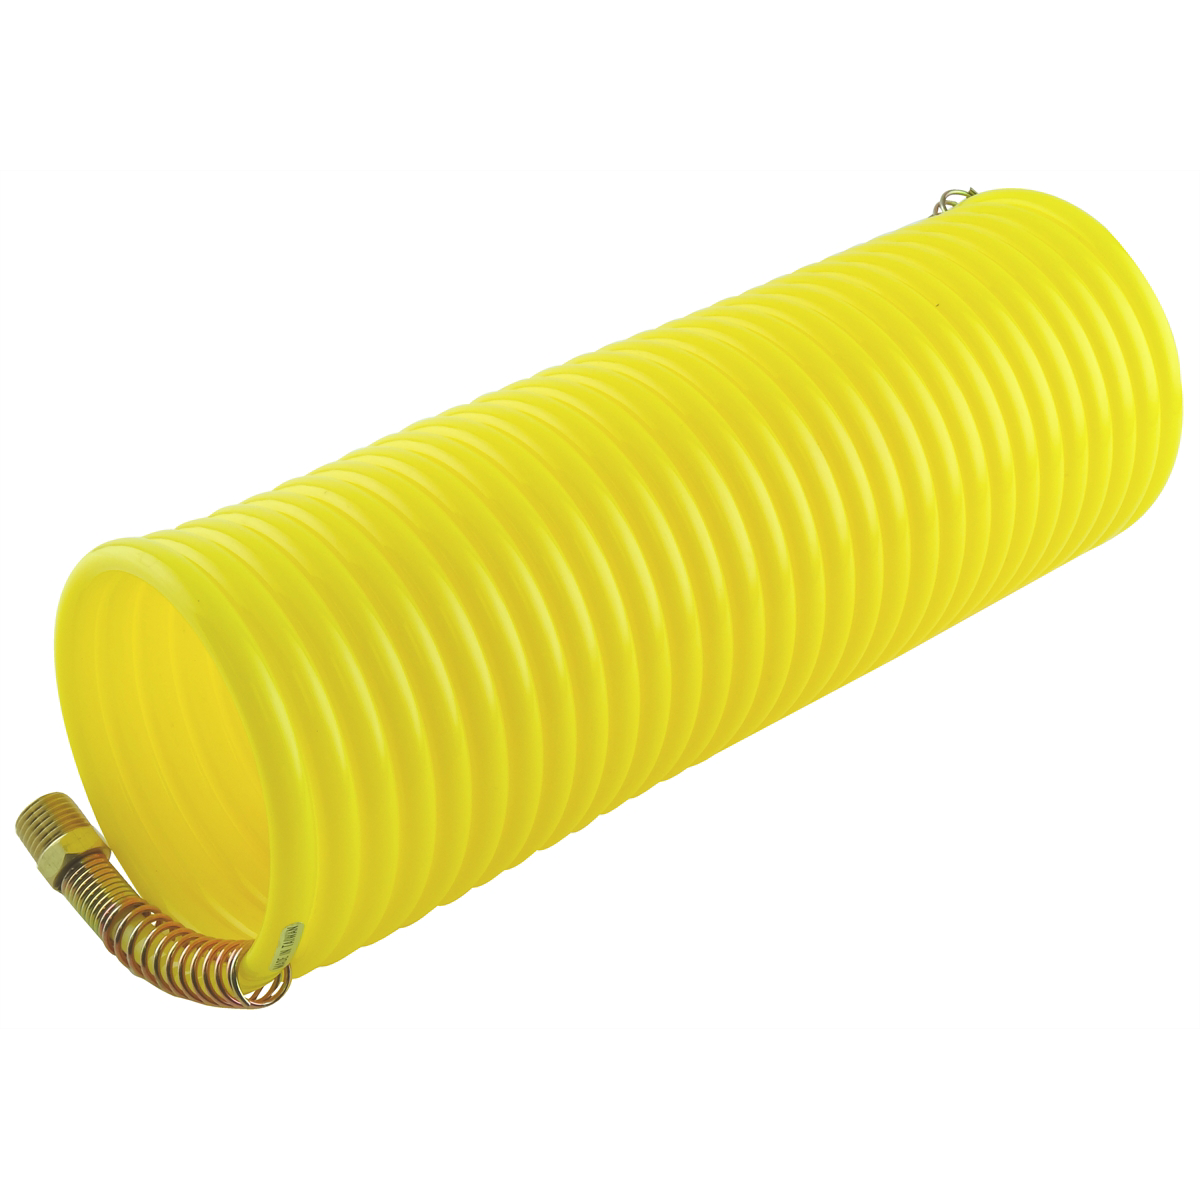 Nylon Recoil Air Hose - 1/4 In x 25 Ft